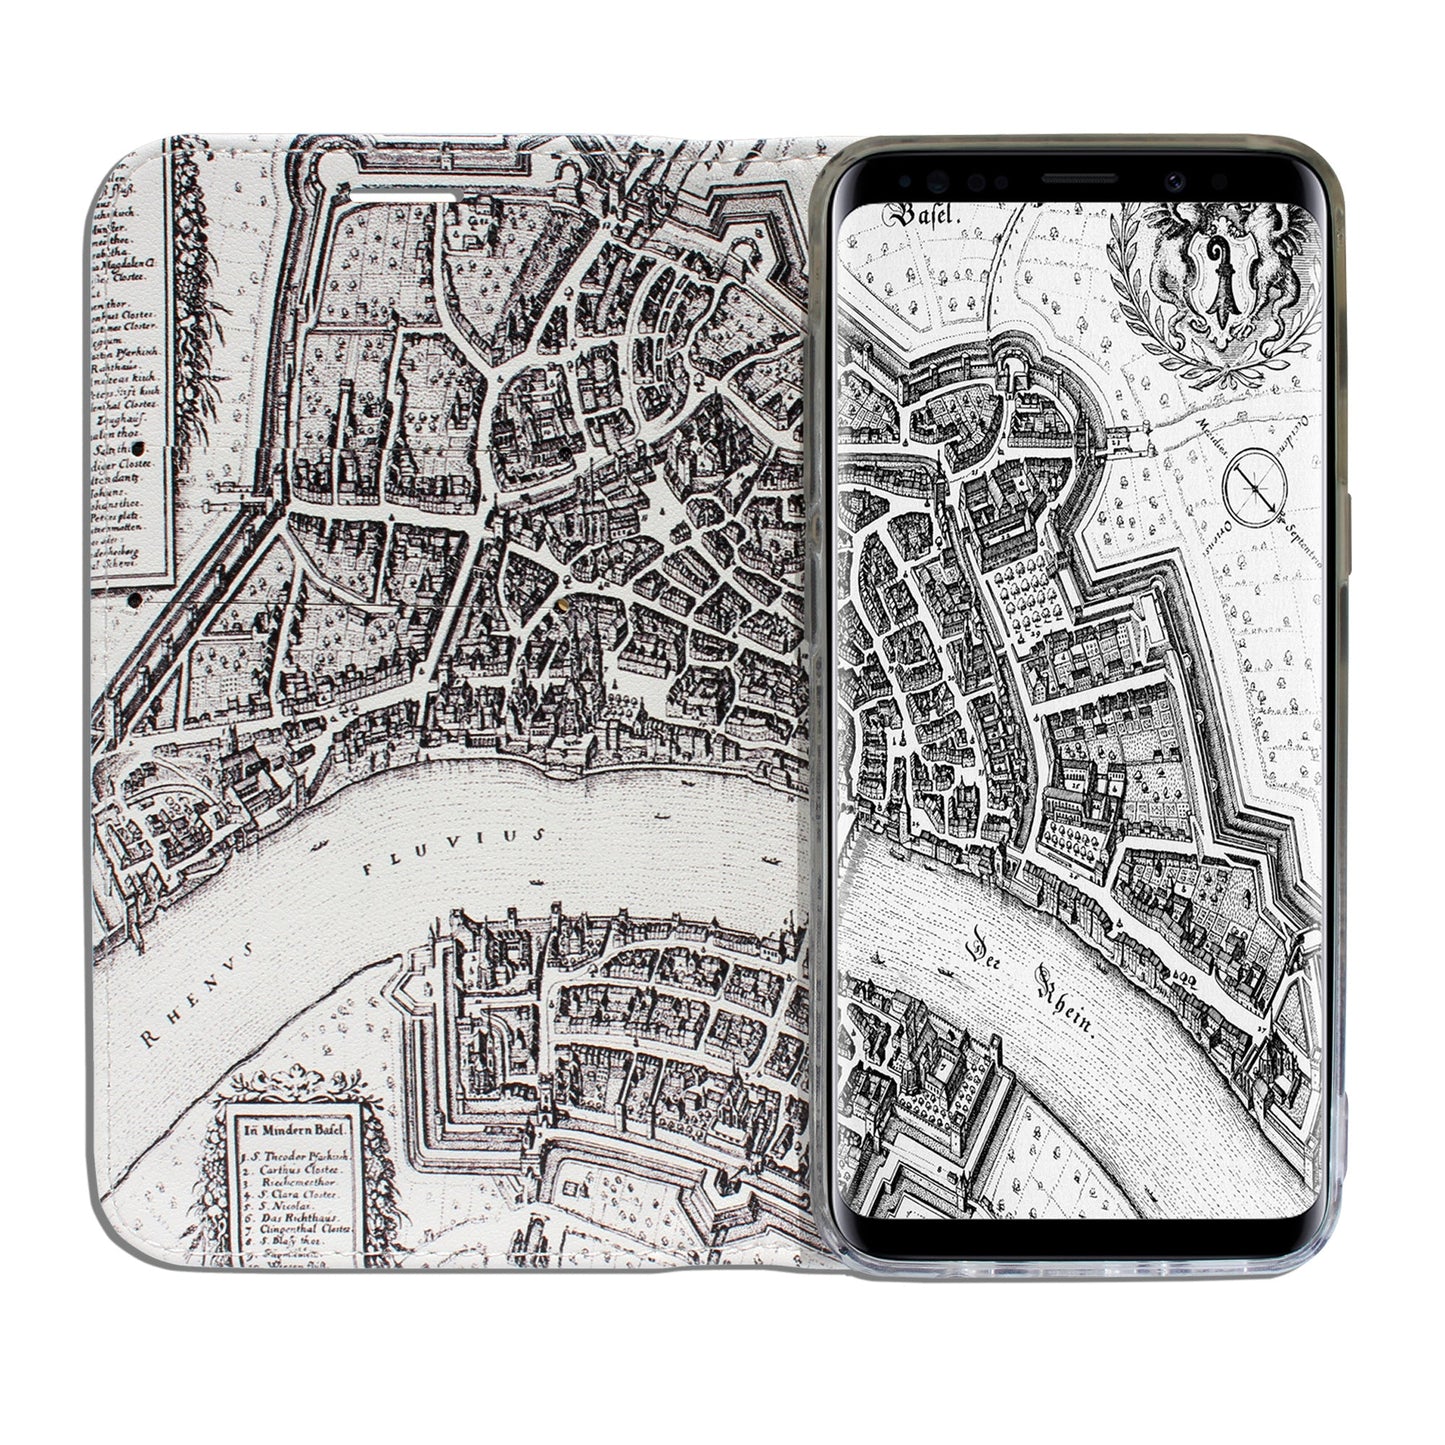 Basel Merian Panorama Case for Samsung Galaxy Note 8